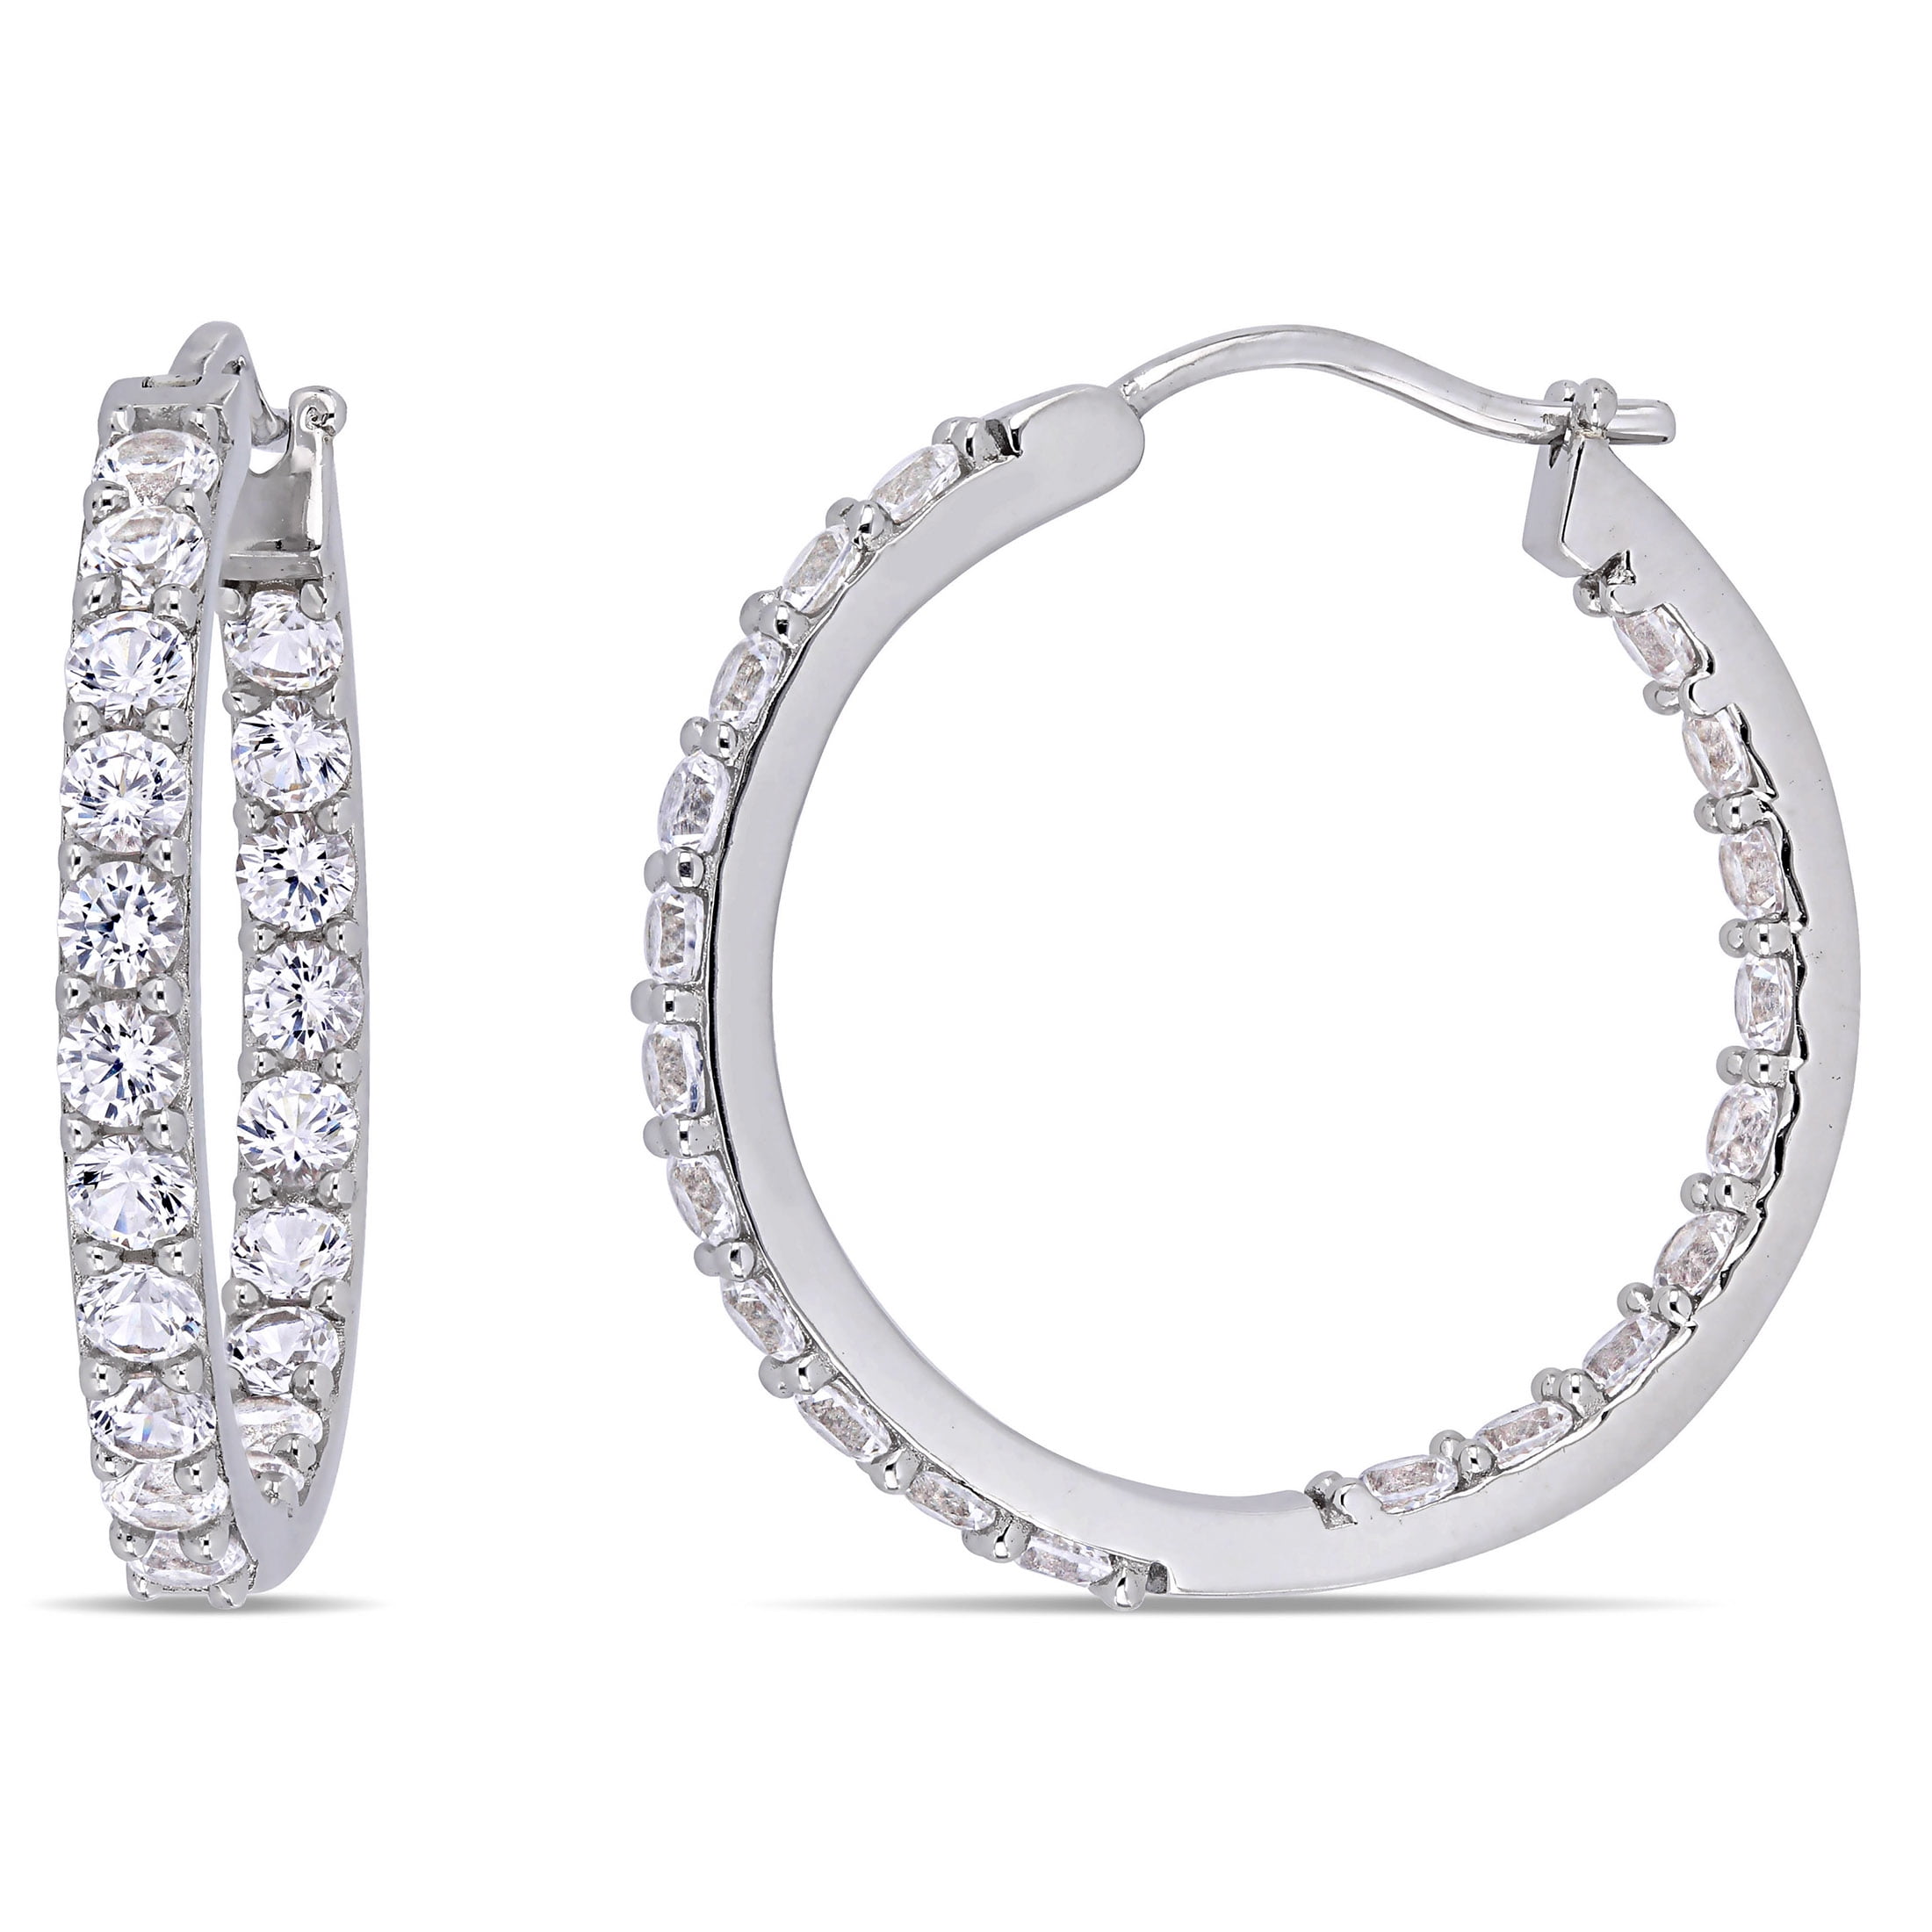 Hot Fashion 925 Silver Jewelry Bright Circle Hoop Earrings For Women Gifts New 